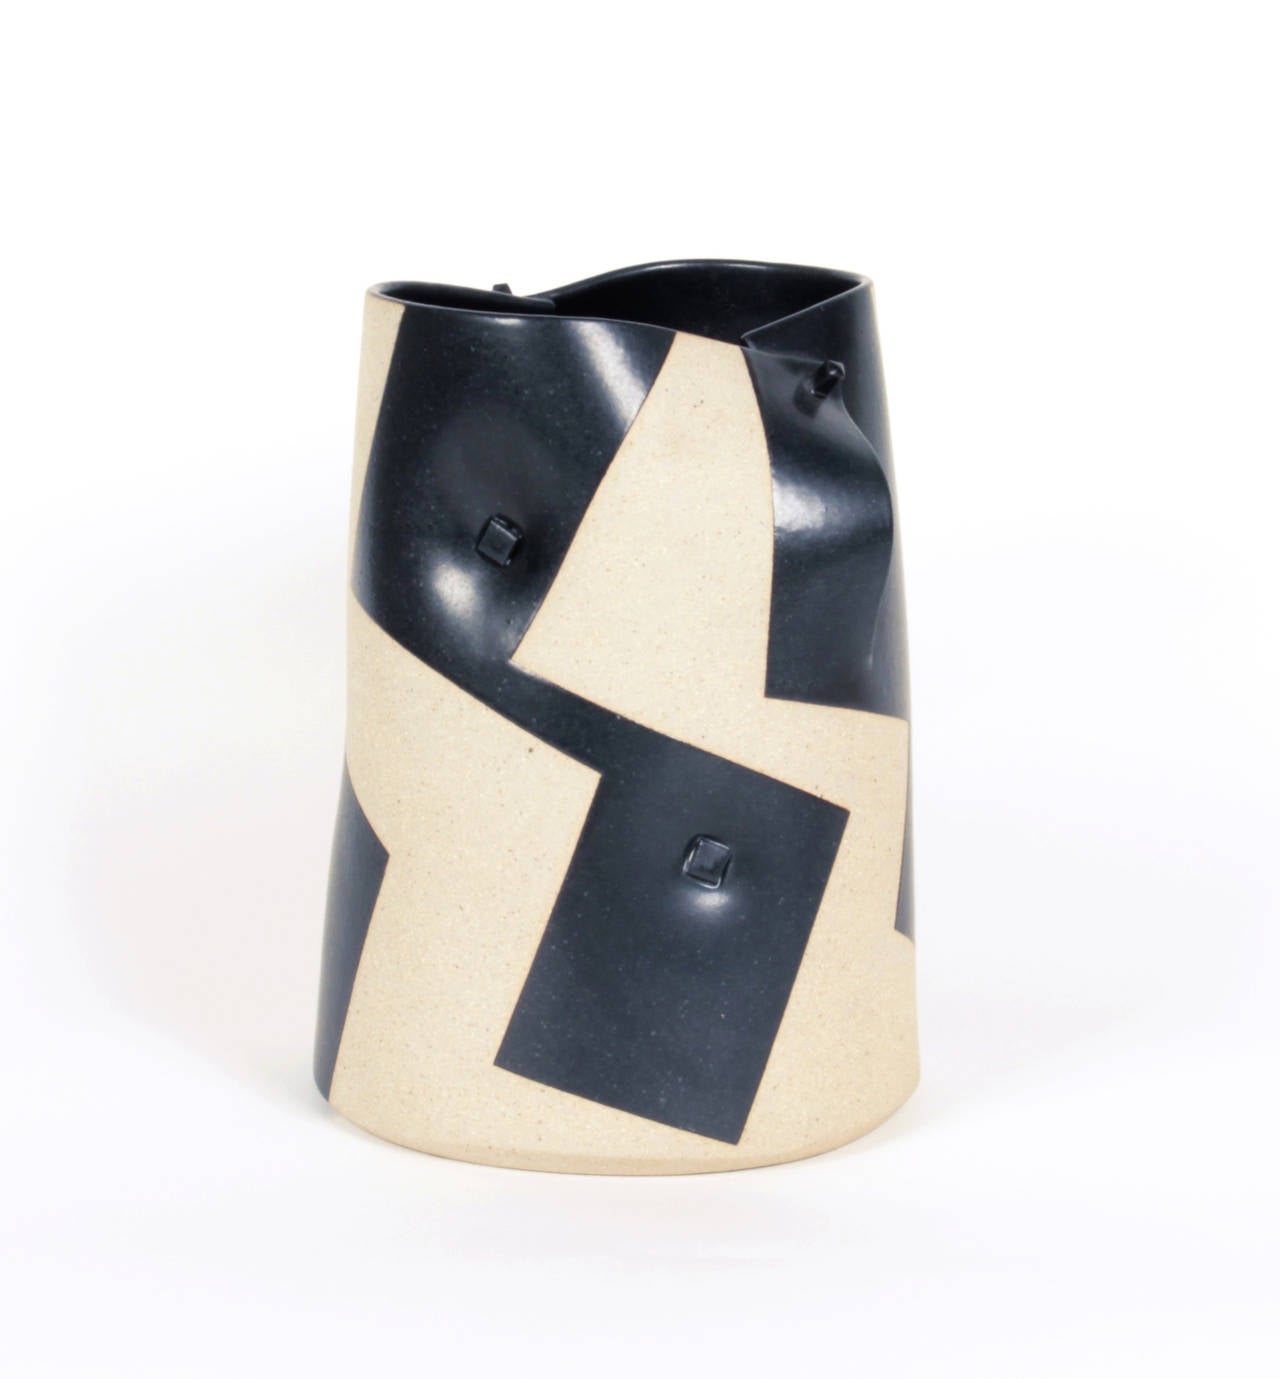 Gustavo Perez, Mexico.

Stoneware vase, 2000.

Black, randomly positioned rectangles on a cream / sandy base with a pinned overlap detail. 

Signed: GP 2000-68.

Dimensions: H: 9 1/4